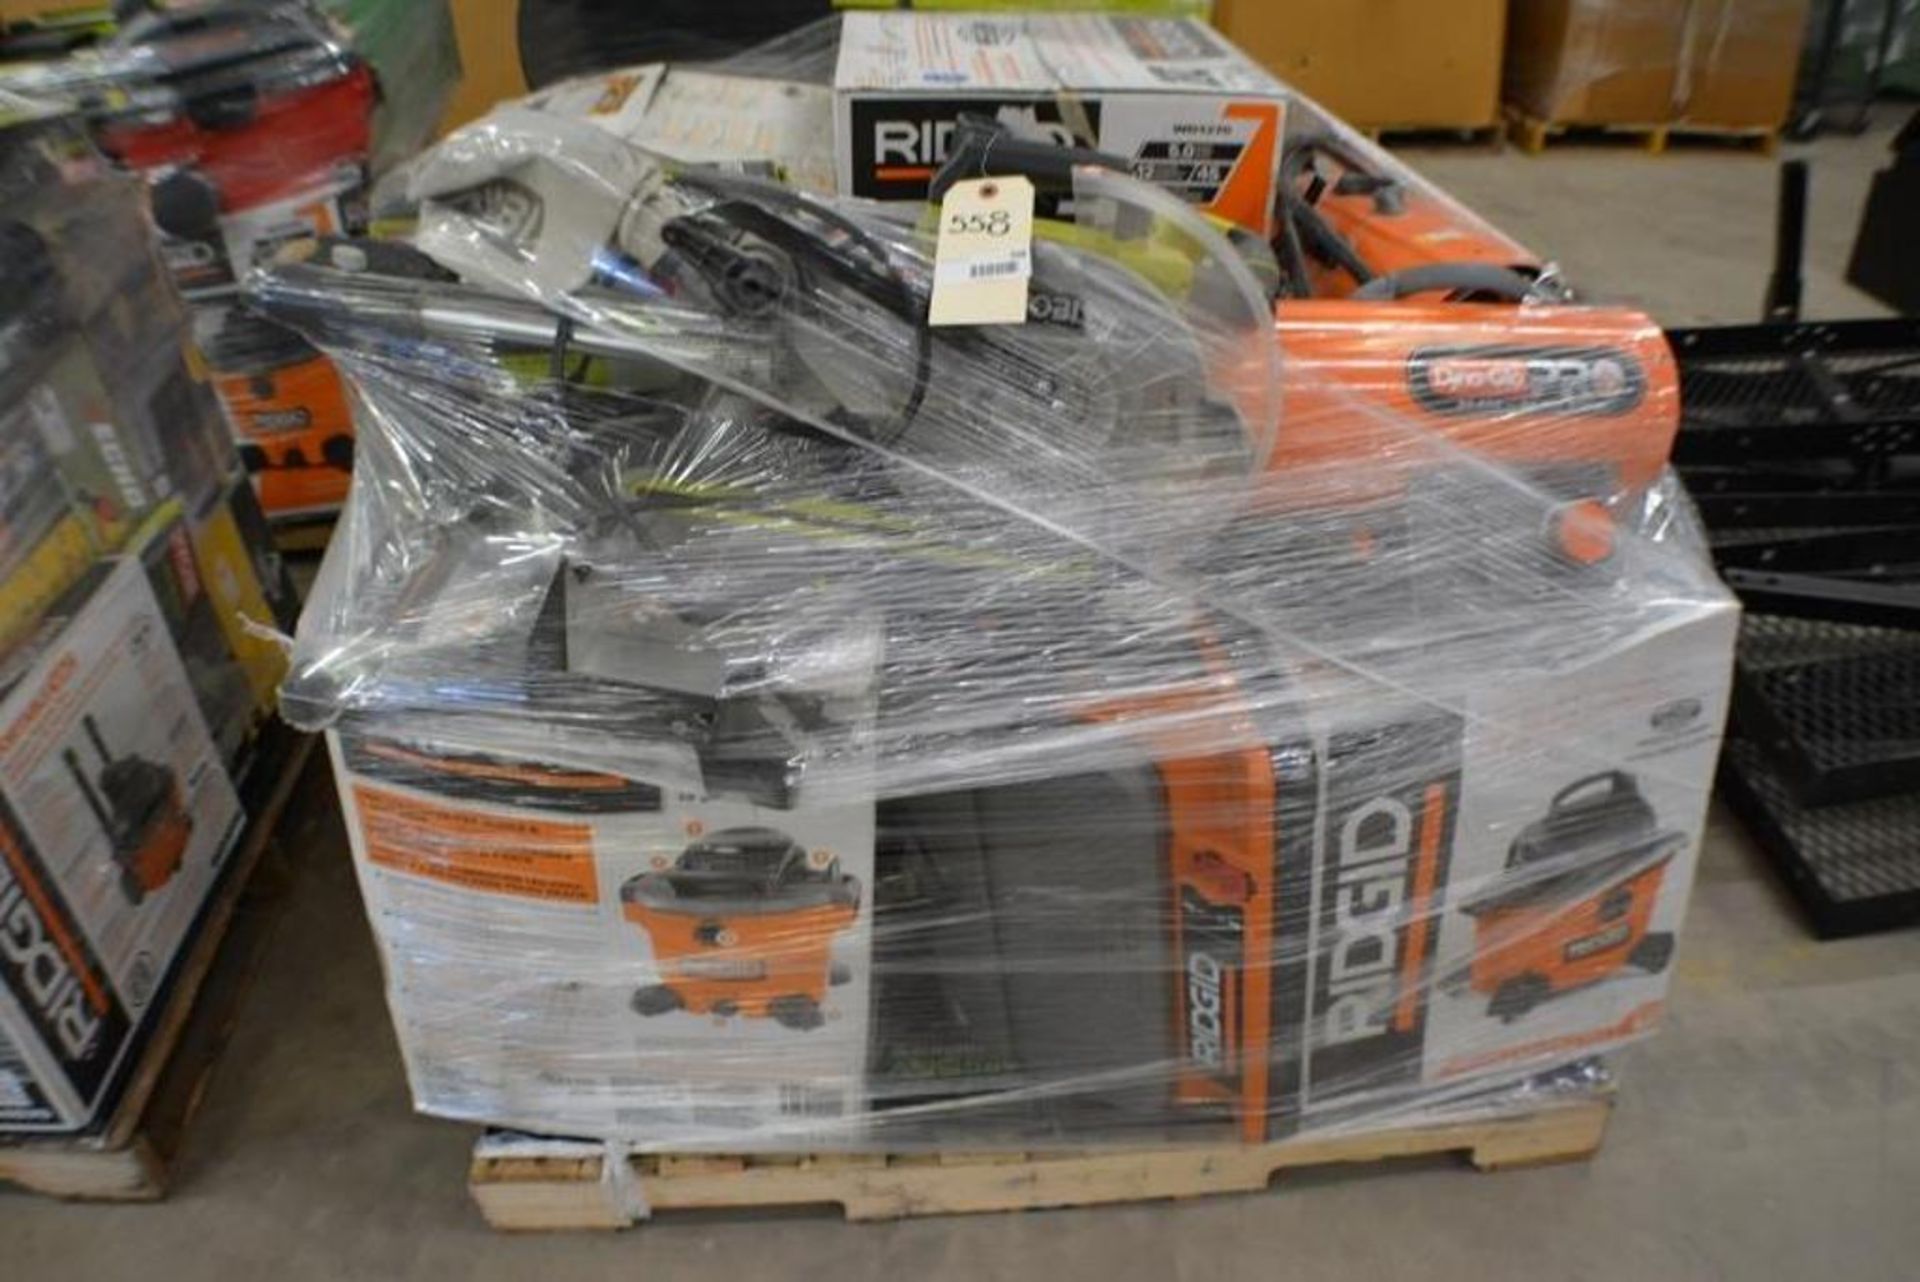 Tools. Assorted Tools and Brands. Ridgid + Ryobi + Dyna Glo-Pro. Heater + Vacuums + Saws and More. C